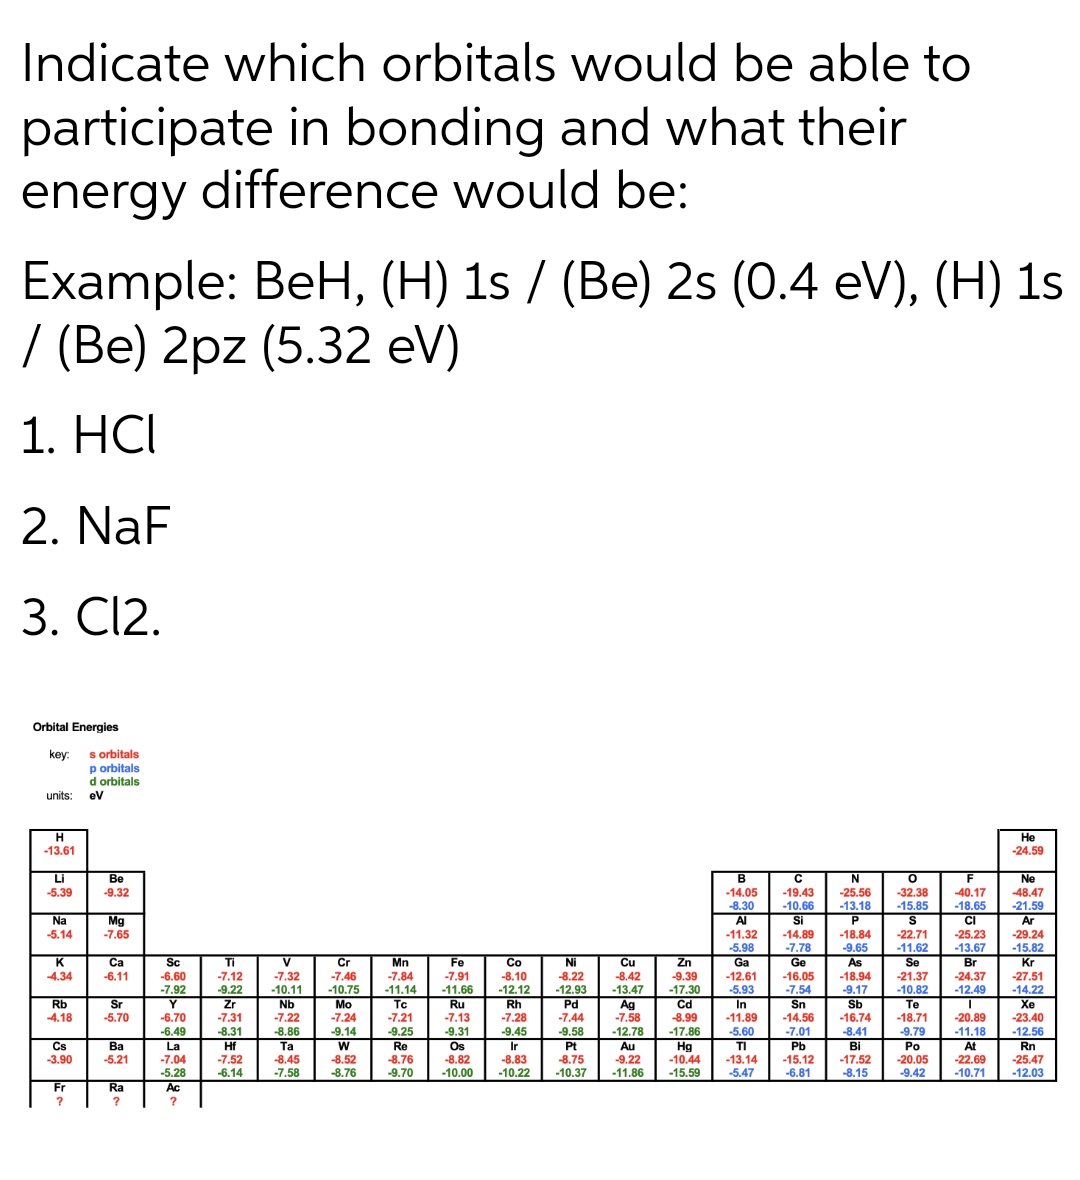 Indicate which orbitals would be able to
participate in bonding and what their
energy difference would be:
Example: BeH, (H) 1s / (Be) 2s (0.4 eV), (H) 1s
/ (Be) 2pz (5.32 eV)
1. HСІ
2. NaF
3. C12.
Orbital Energies
key: s orbitals
p orbitals
d orbitals
units: eV
Не
H
-13.61
-24.59
Li
Ве
B
Ne
-19.43
-10.66
-32.38
-15.85
40.17
-18.65
-48.47
-21.59
-5.39
-25.56
13.18
-9.32
-14.05
-8.30
Al
S
CI
Ar
-29.24
-15.82
Na
Mg
Si
P
-14.89
-7.78
-18.84
-9.65
As
-5.14
-7.65
-11.32
-5.98
-22.71
-11.62
-25.23
-13.67
Ti
-7.12
K
V
Mn
Fe
Ni
Cu
Zn
-9.39
-17.30
Ga
-12.61
-5.93
In
-11.89
Br
-24.37
-12.49
Са
Sc
Cr
Co
Ge
Se
Kr
-16.05
-7.54
-18.94
-9.17
-21.37
-10.82
4.34
-6.11
-6.60
-7.92
-7.32
-10.11
-7.46
-7.84
-7.91
-11.66
-8.10
-8.22
-8.42
-27.51
-13.47
Ag
-7.58
-9.22
-10.75
-11.14
-12.12
-12.93
-14.22
Rb
-4.18
Sr
-5.70
Sb
-16.74
Y
Zr
-7.31
Nb
Mo
-7.24
Tc
-7.21
Ru
-7.13
Rh
Pd
-7.44
Cd
-8.99
-17.86
Hg
Sn
-14.56
Te
-18.71
Xe
-23.40
-6.70
-7.22
-8.86
-7.28
-20.89
-6.49
-8.31
-9.14
-9.25
-9.31
-9.45
-9.58
-12.78
-5.60
-7.01
-8.41
-9.79
-11.18
-12.56
Hf
W
Os
Pt
Cs
-3.90
Ва
La
Ta
Re
-8.76
-9.70
Ir
Au
-9.22
-11.86
TI
-13.14
-5.47
Pb
Bi
Po
-20.05
-9.42
At
-22.69
-10.71
Rn
-5.21
-7.04
-5.28
-7.52
-6.14
-8.45
-7.58
-8.52
-8.76
-8.82
-10.00
-8.83
-10.22
-8.75
-10.37
-10.44
-15.59
-15.12
-6.81
-17.52
-25.47
-8.15
-12.03
Fr
Ra
Ac
?
?
